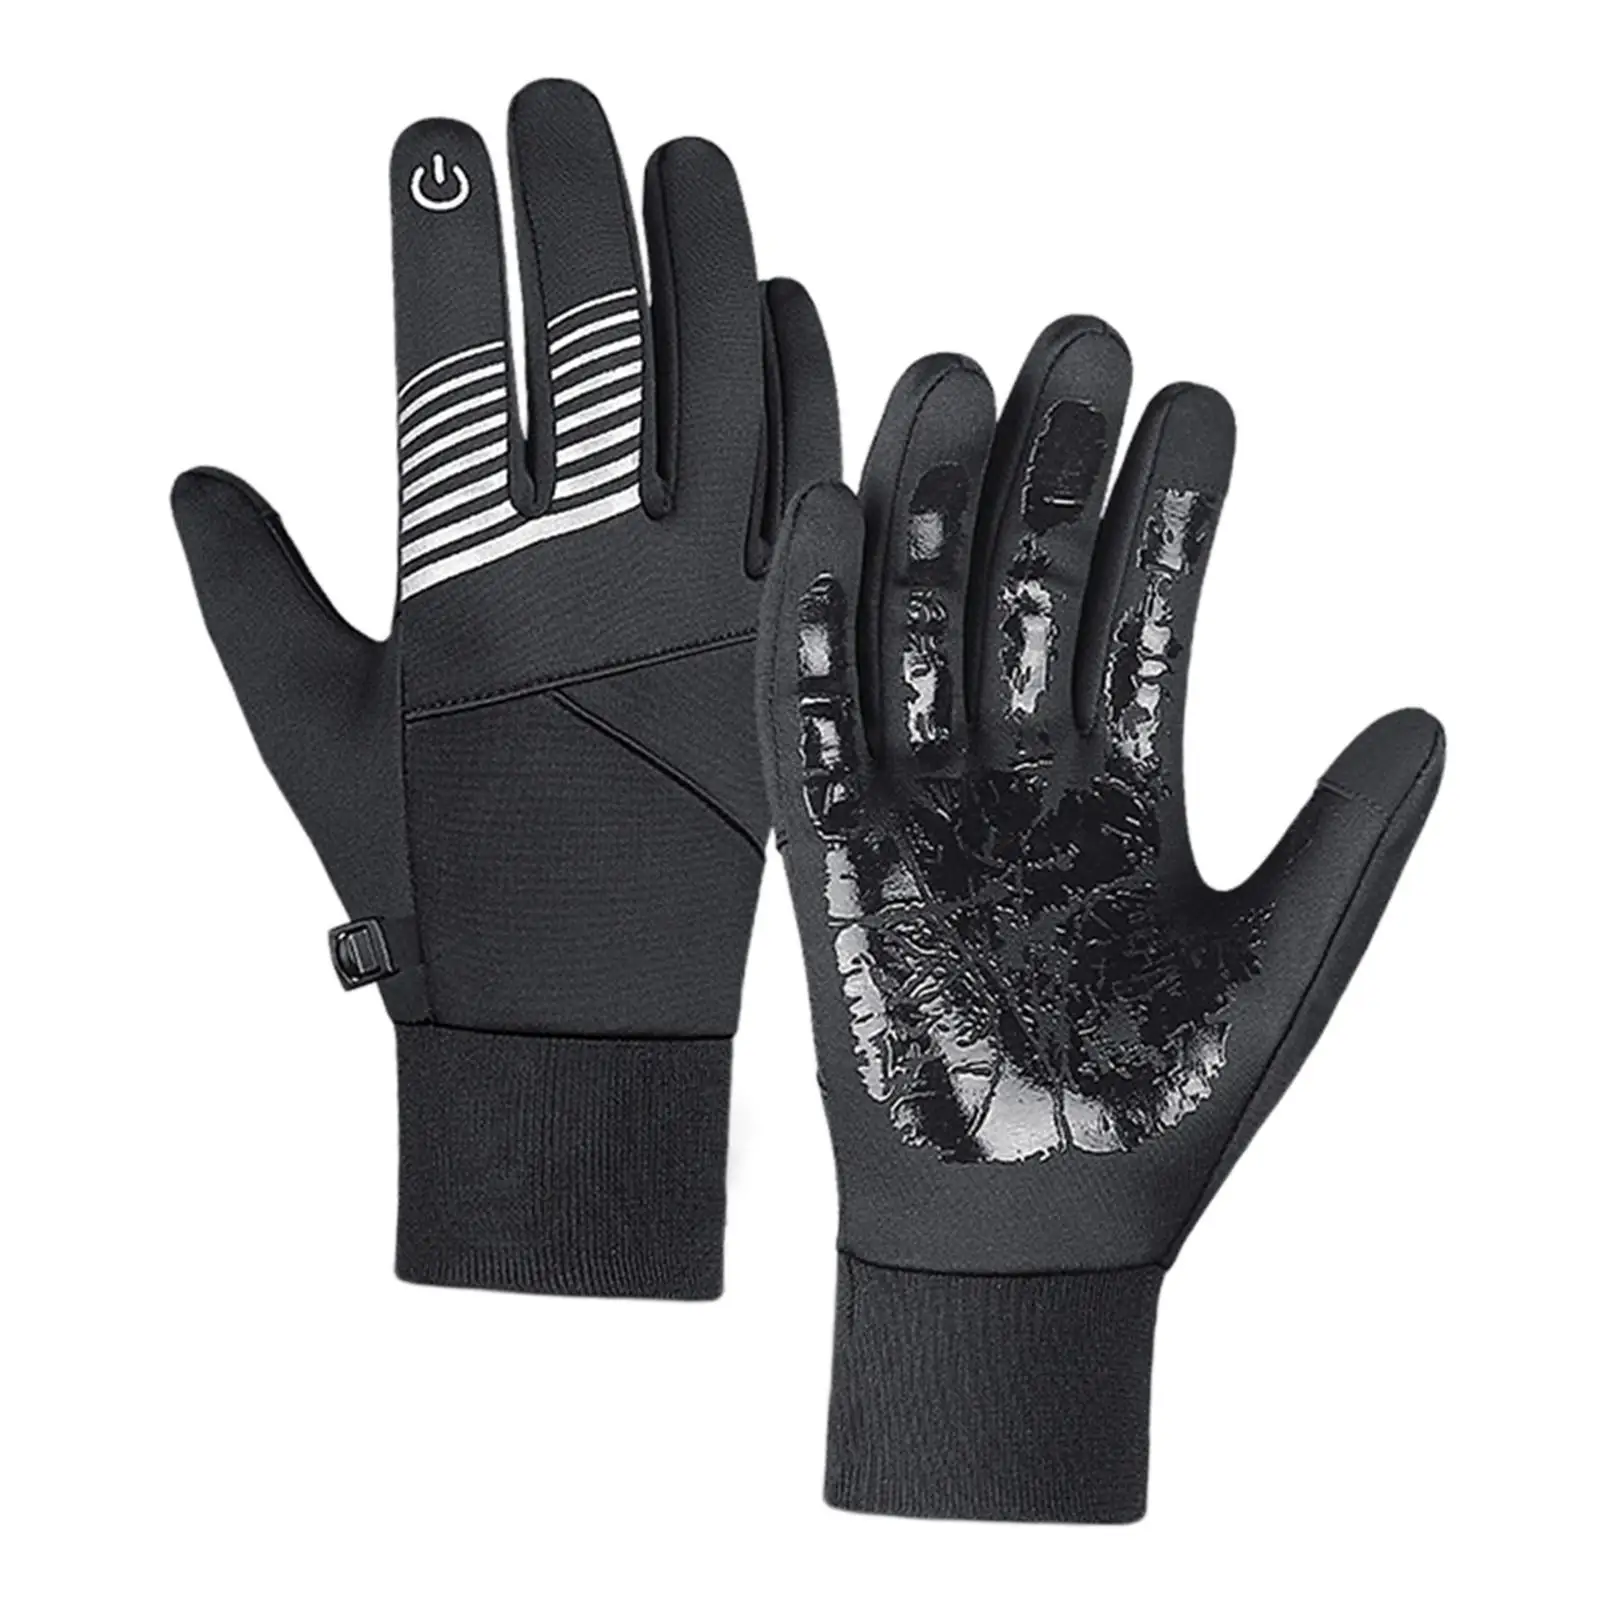 Touch Screen Winter Gloves Non Slip Palm Warm Mittens for Cycling Fishing